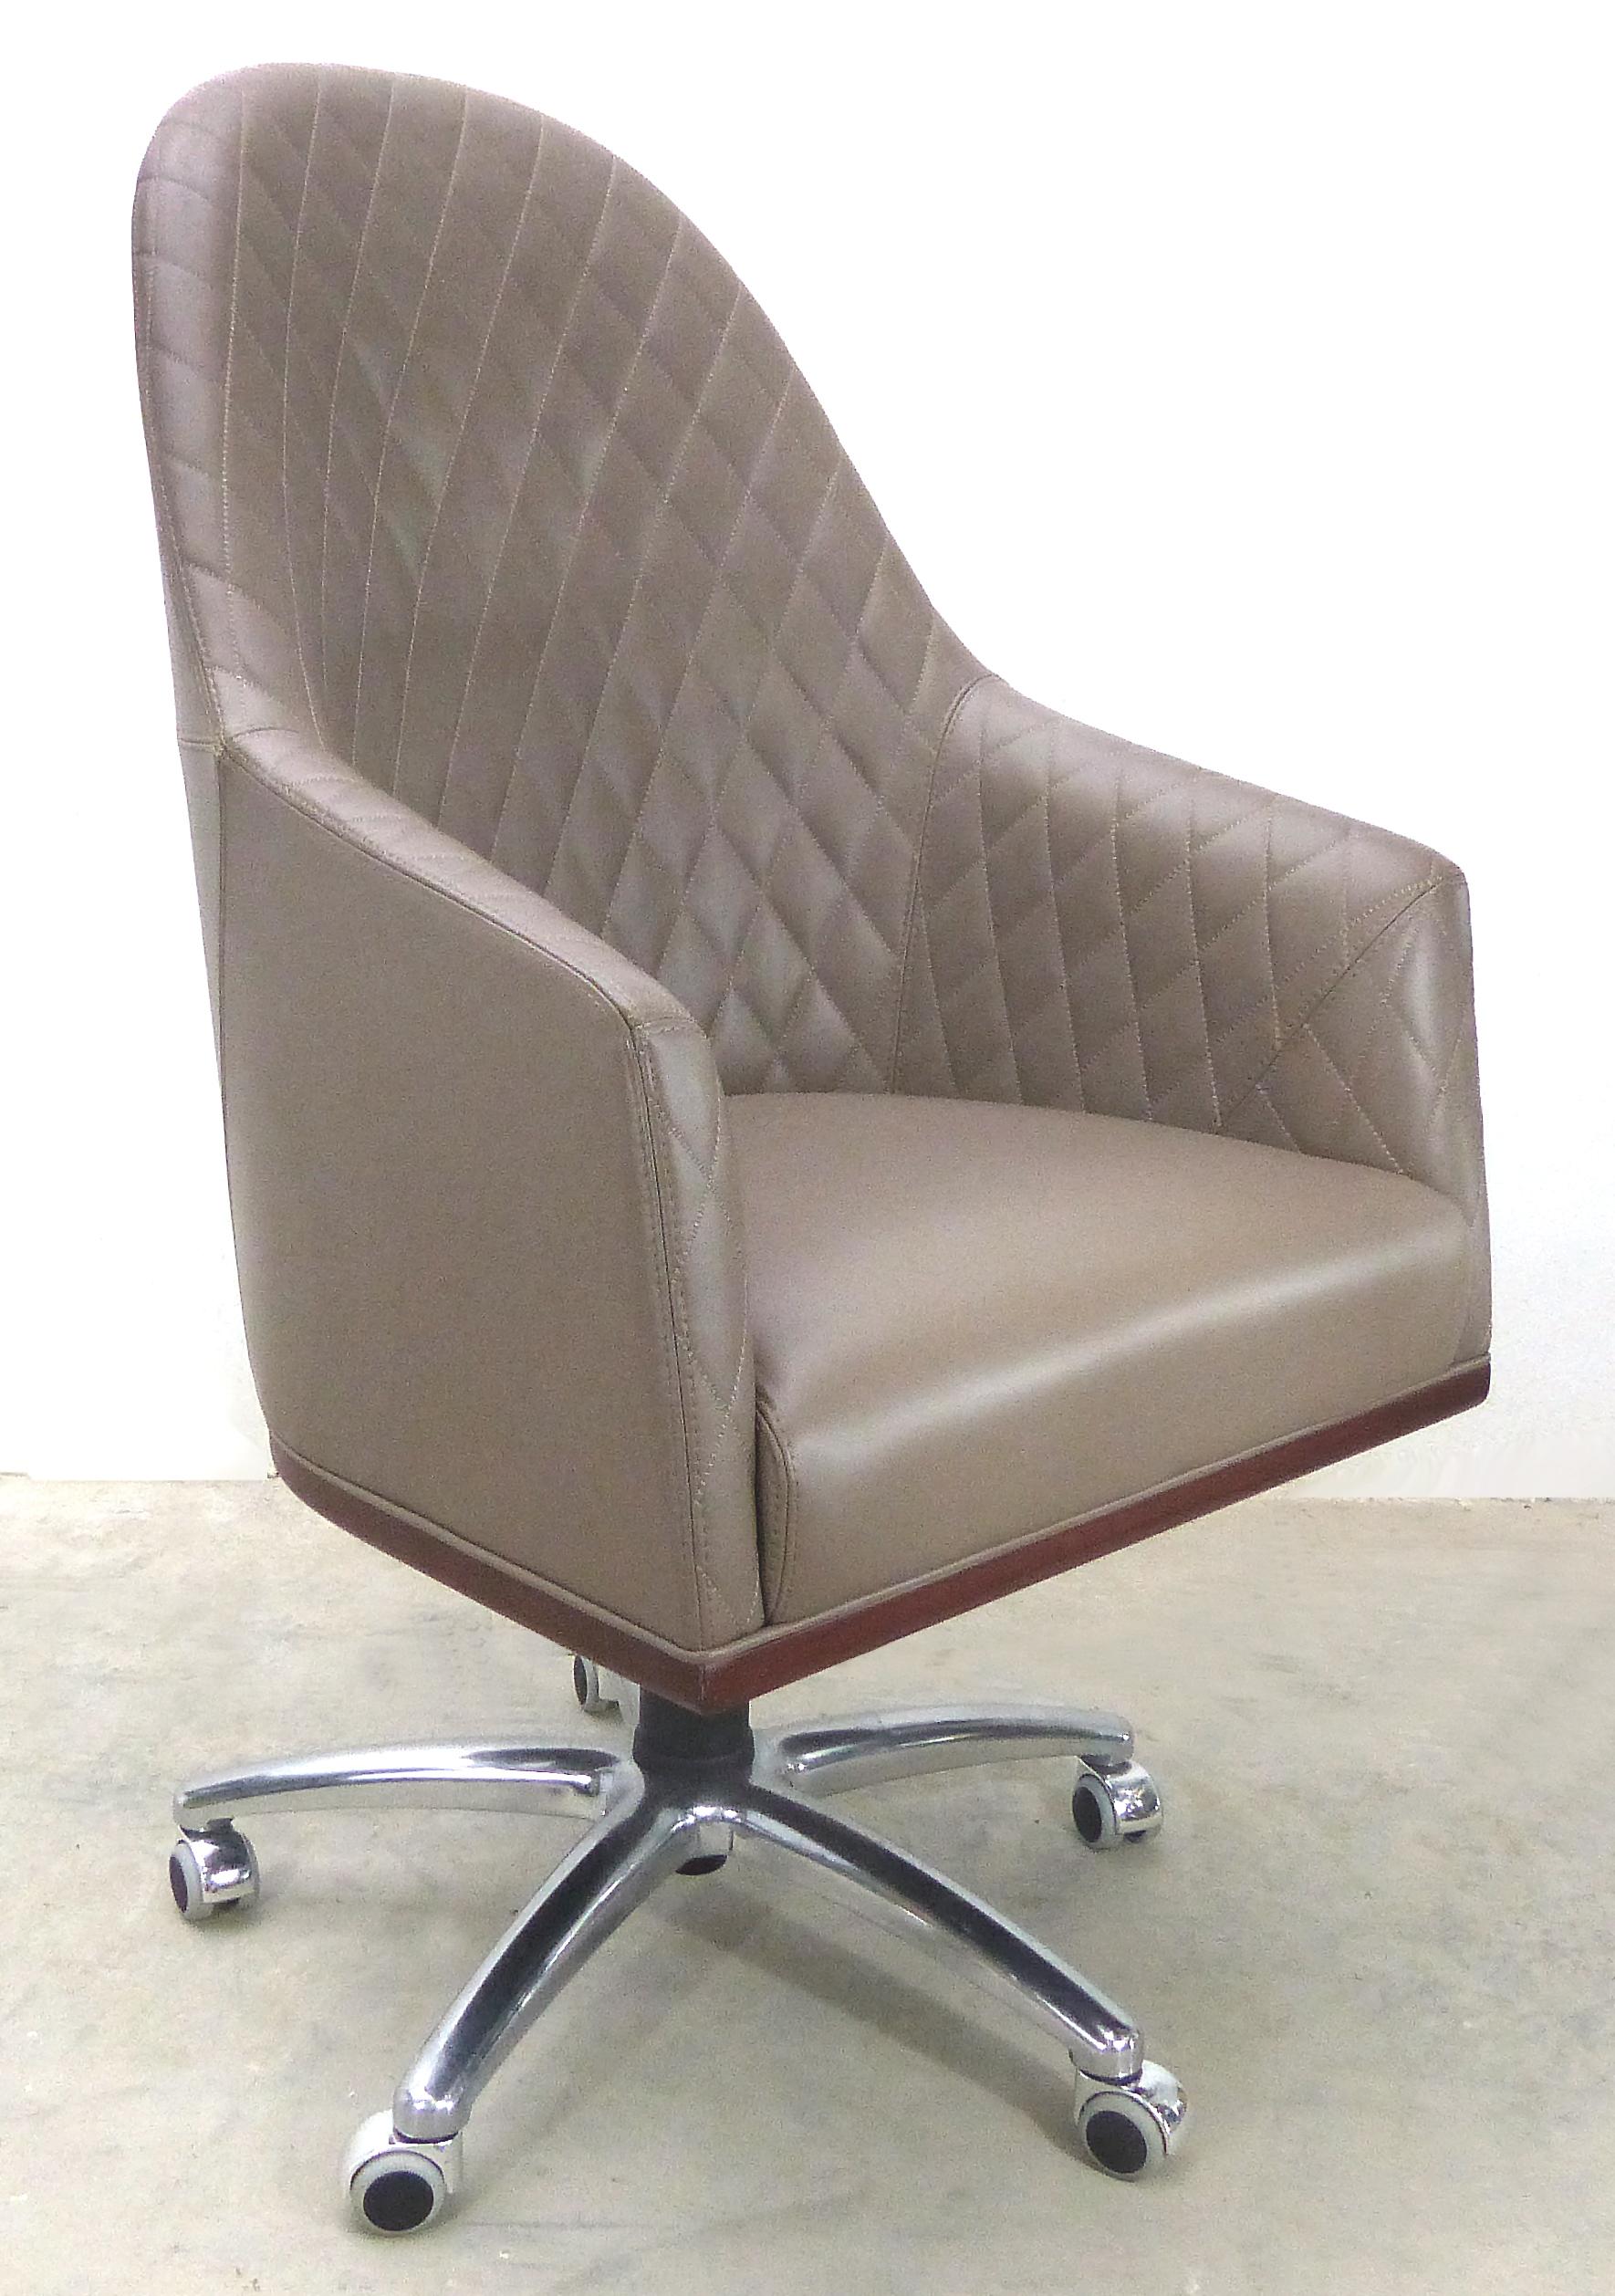 Modern Leather Swivel Desk Chair by Umberto Asnago for Medea Mobiledia, Italy